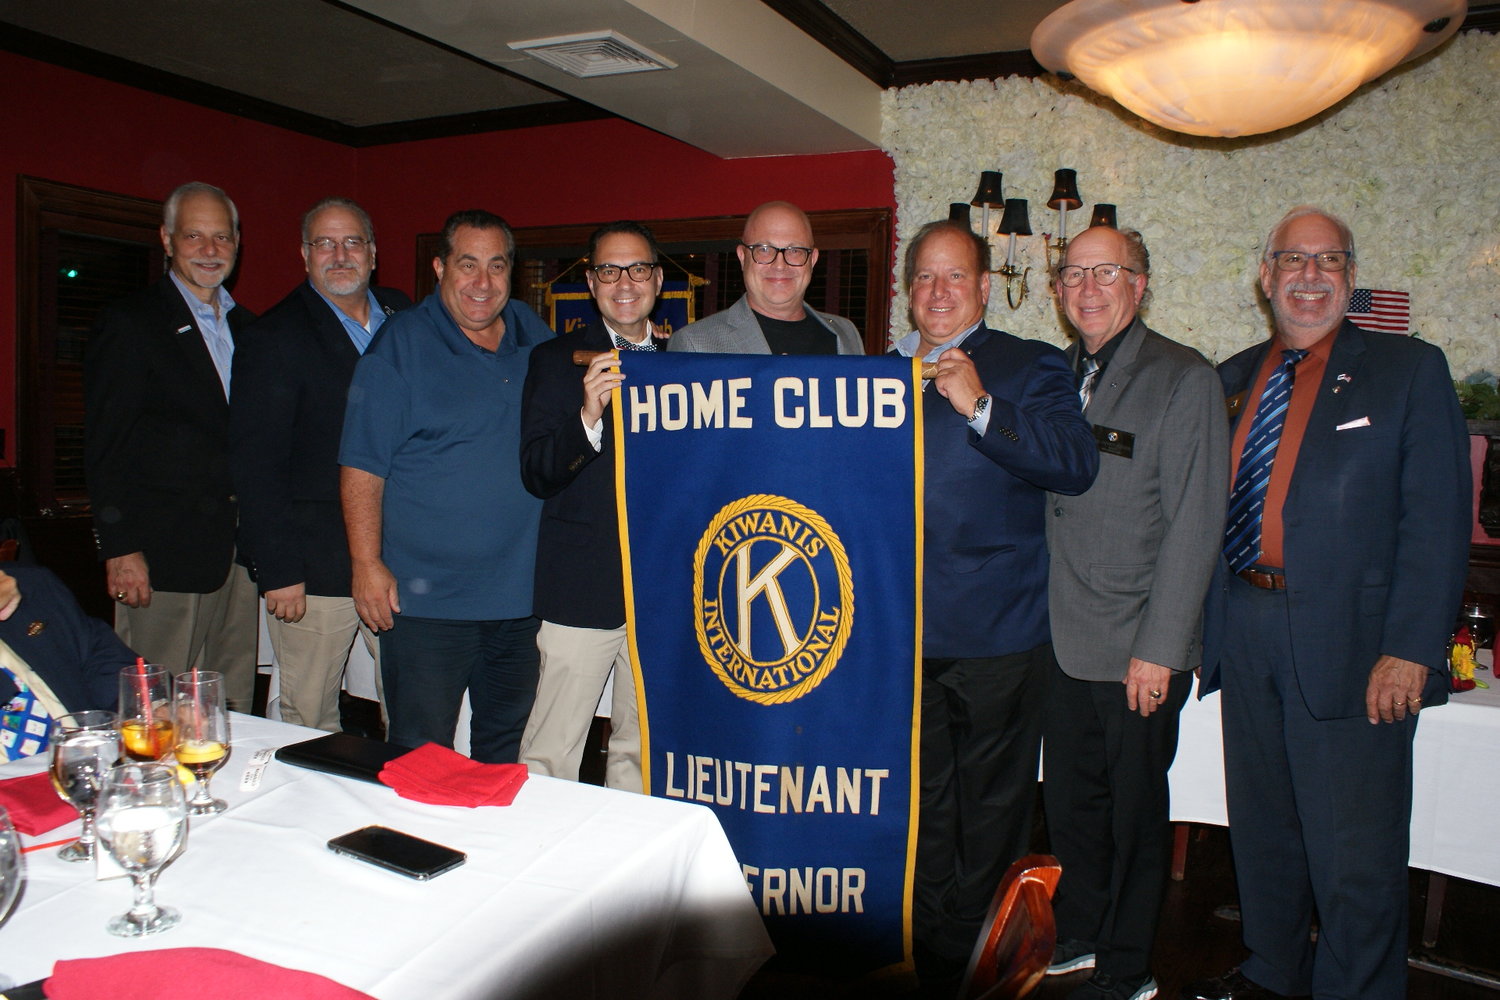 At a ceremony at Frank’s Steak in Rockville Centre last week, the Oceanside Kiwanis Club passed the home banner to the Five Towns club.